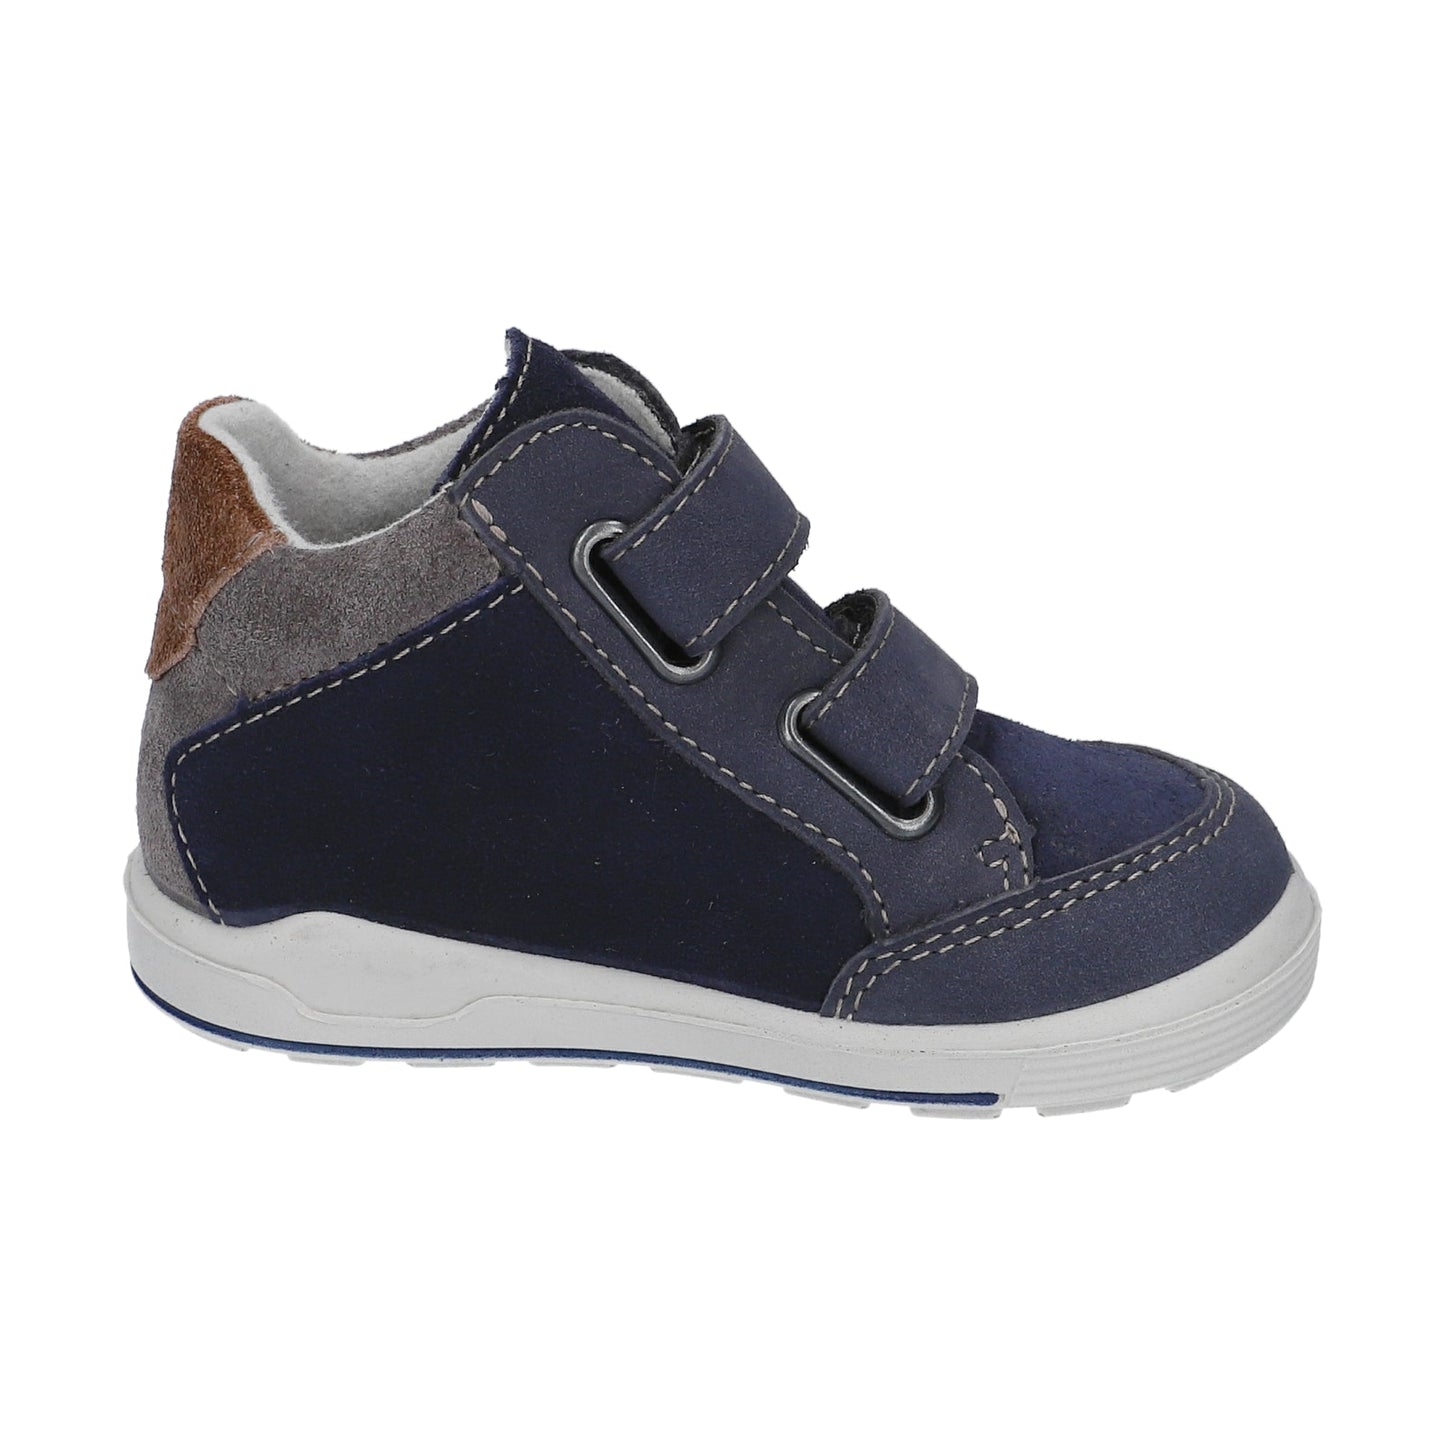 Kimi Waterproof Boot in Navy and Brown Leather